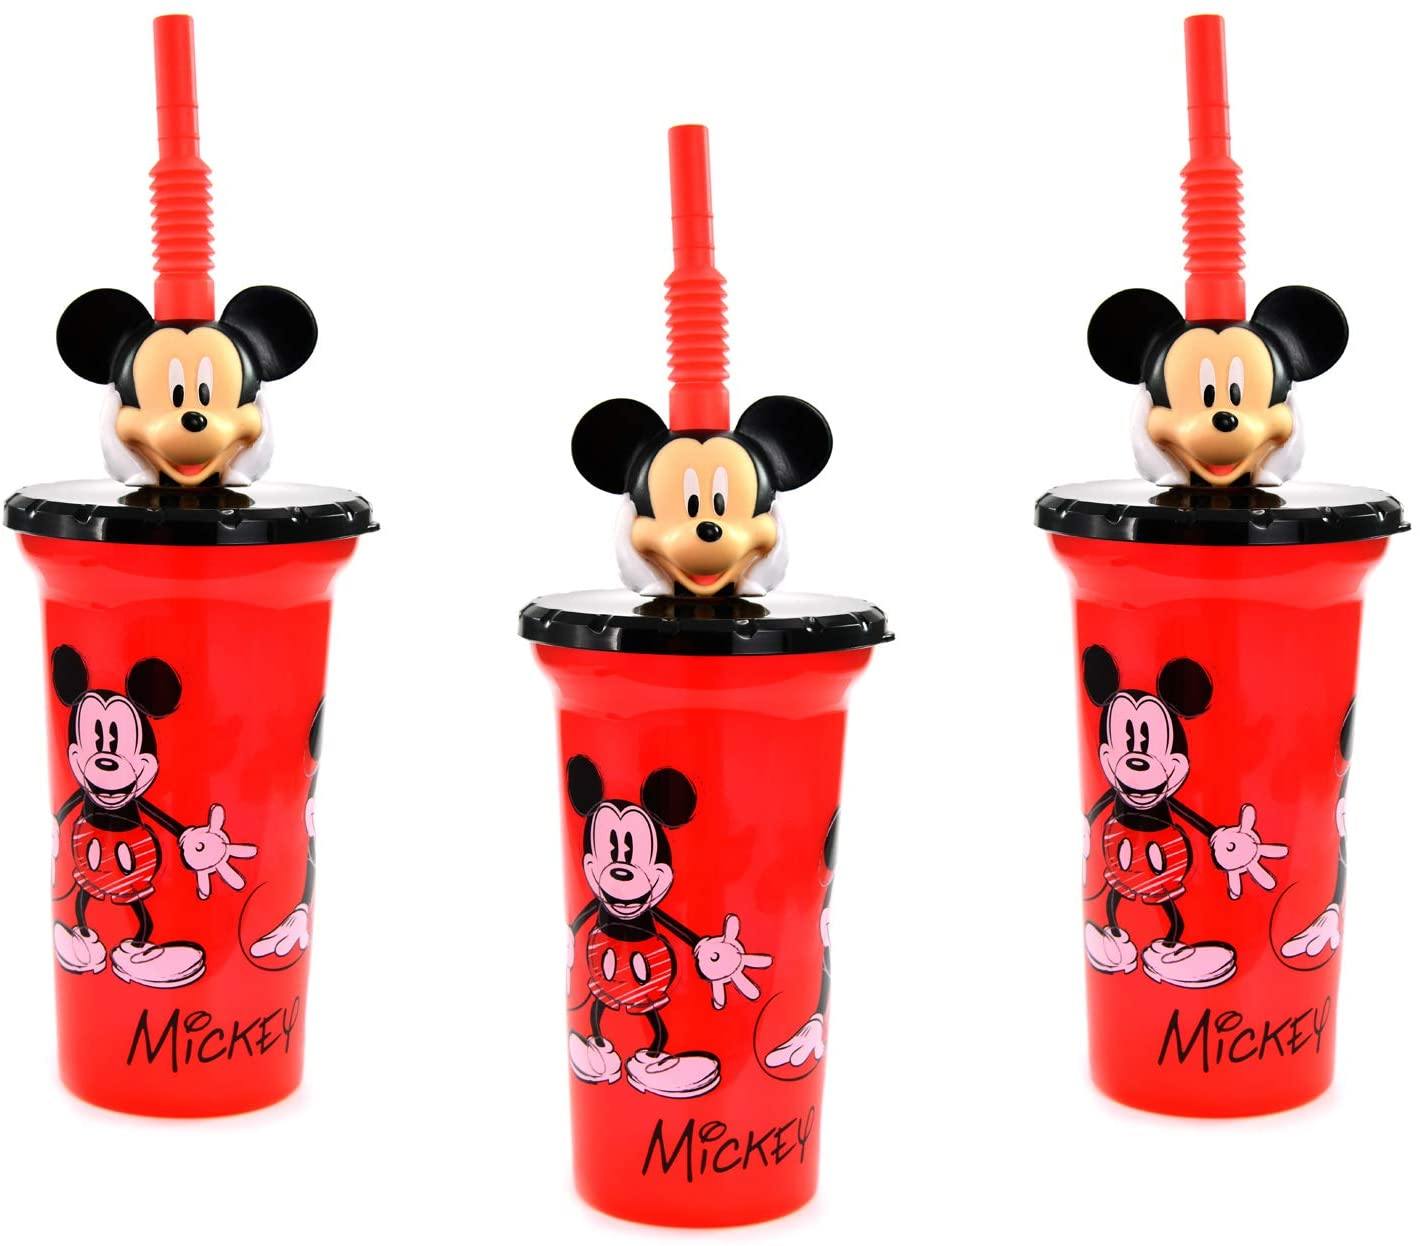 https://cdn.shopify.com/s/files/1/0107/9302/5598/files/3-pack-disney-mickey-mouse-15oz-buddy-sip-tumbler-cup-with-lid-and-straw-bpa-free-1-33073989746872.jpg?v=1692809971&width=1420